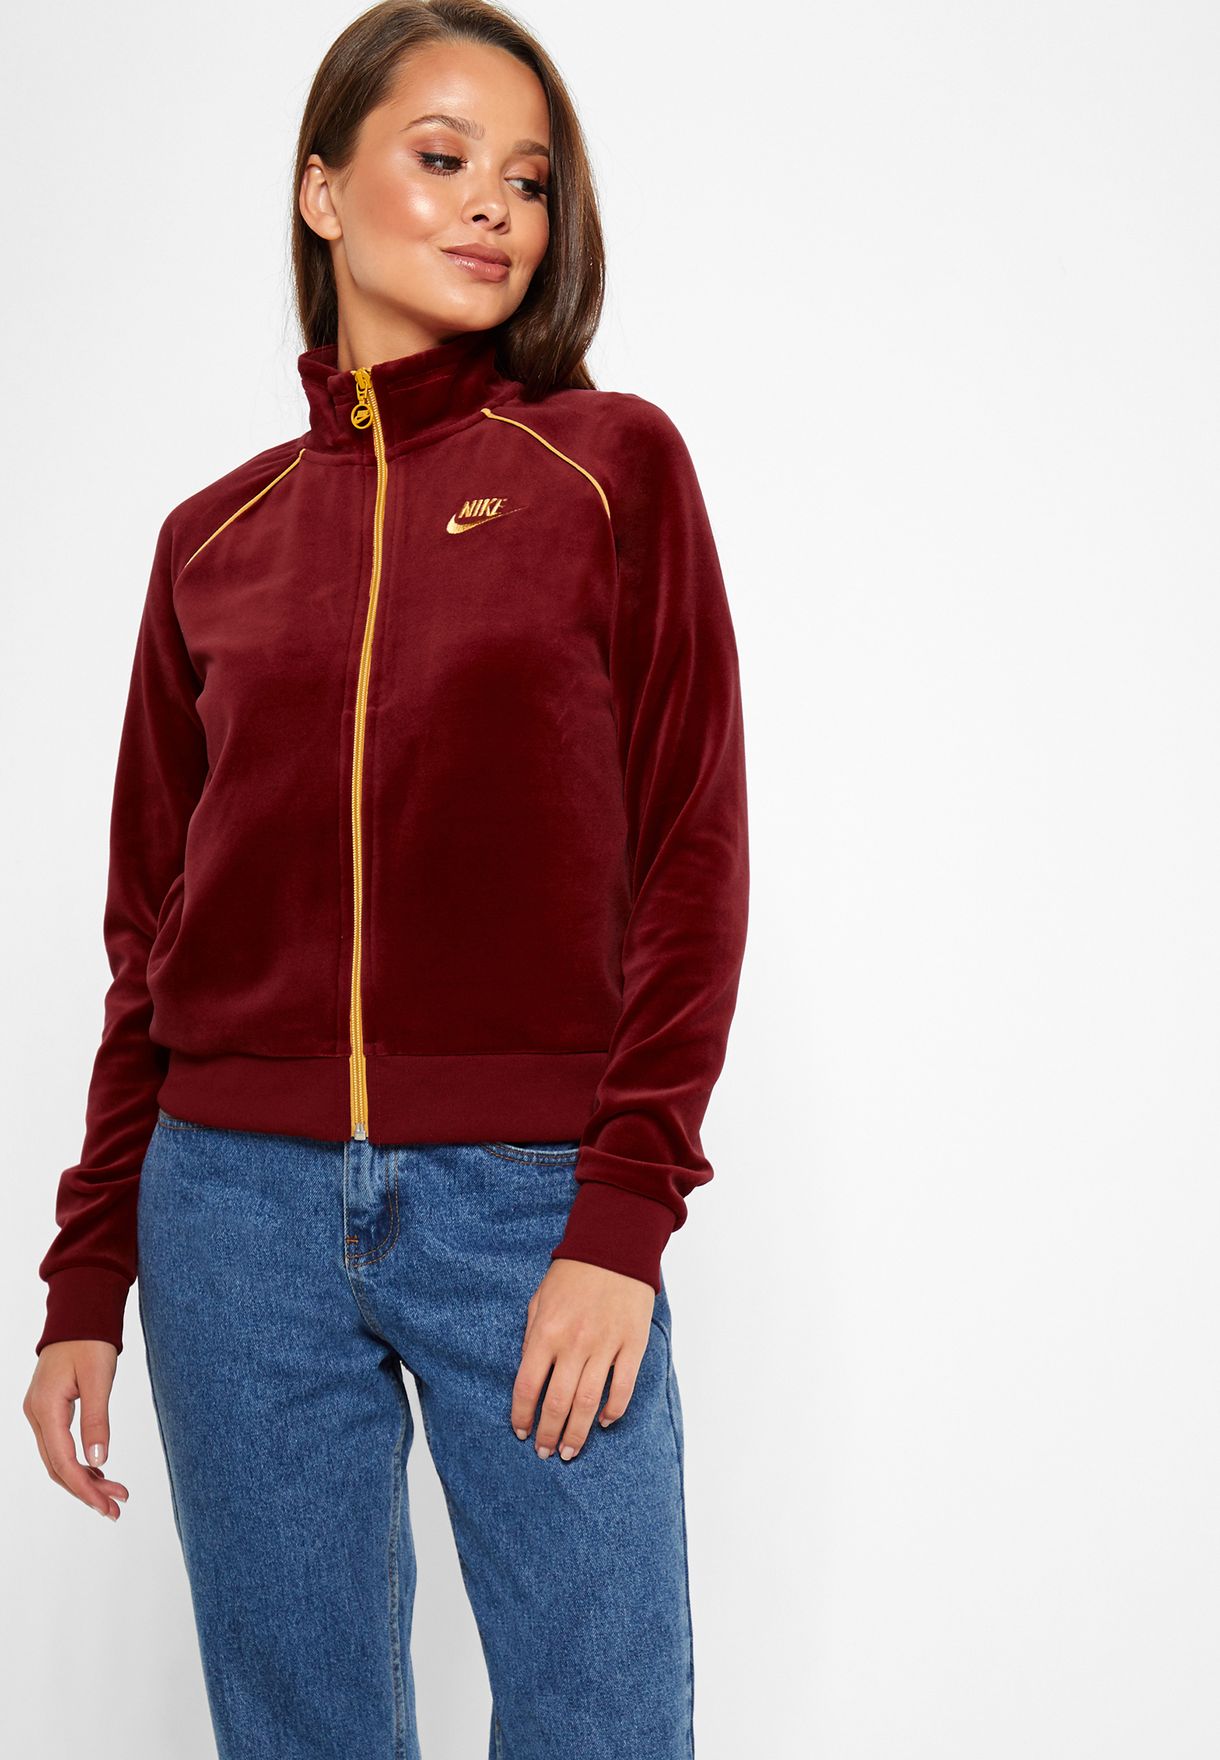 Buy Nike red Velour Track Jacket for 